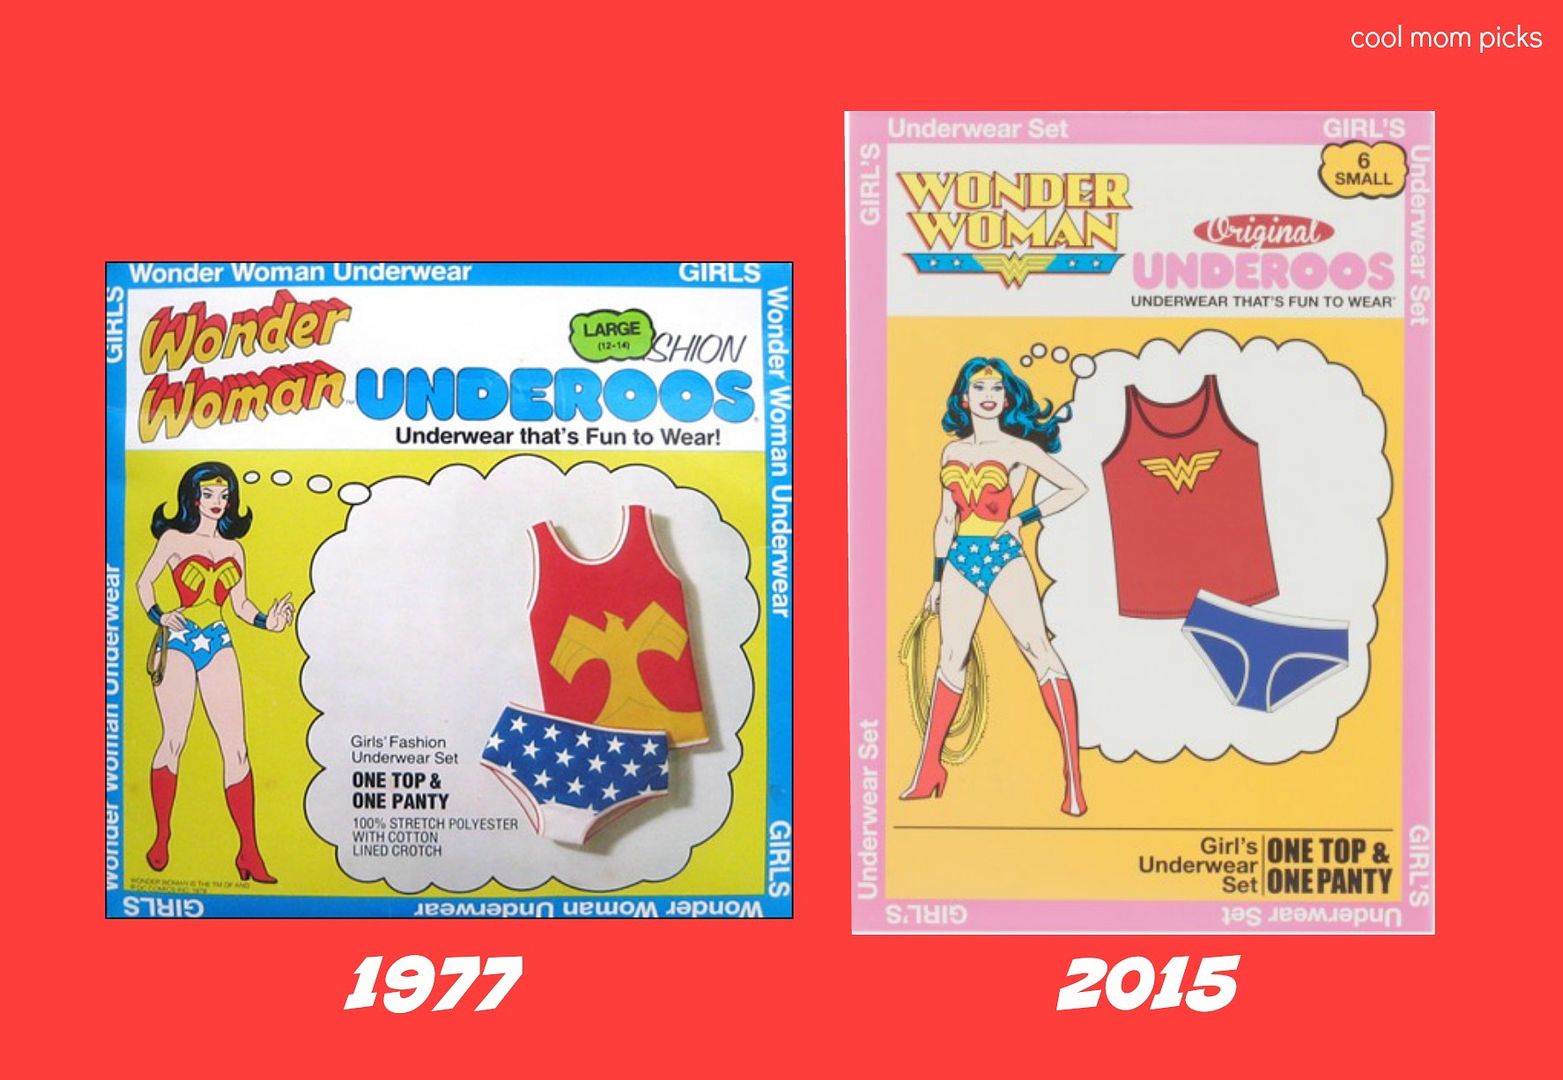 Wonder Woman Underoos for kids - They're back! But no stars? Sniff.